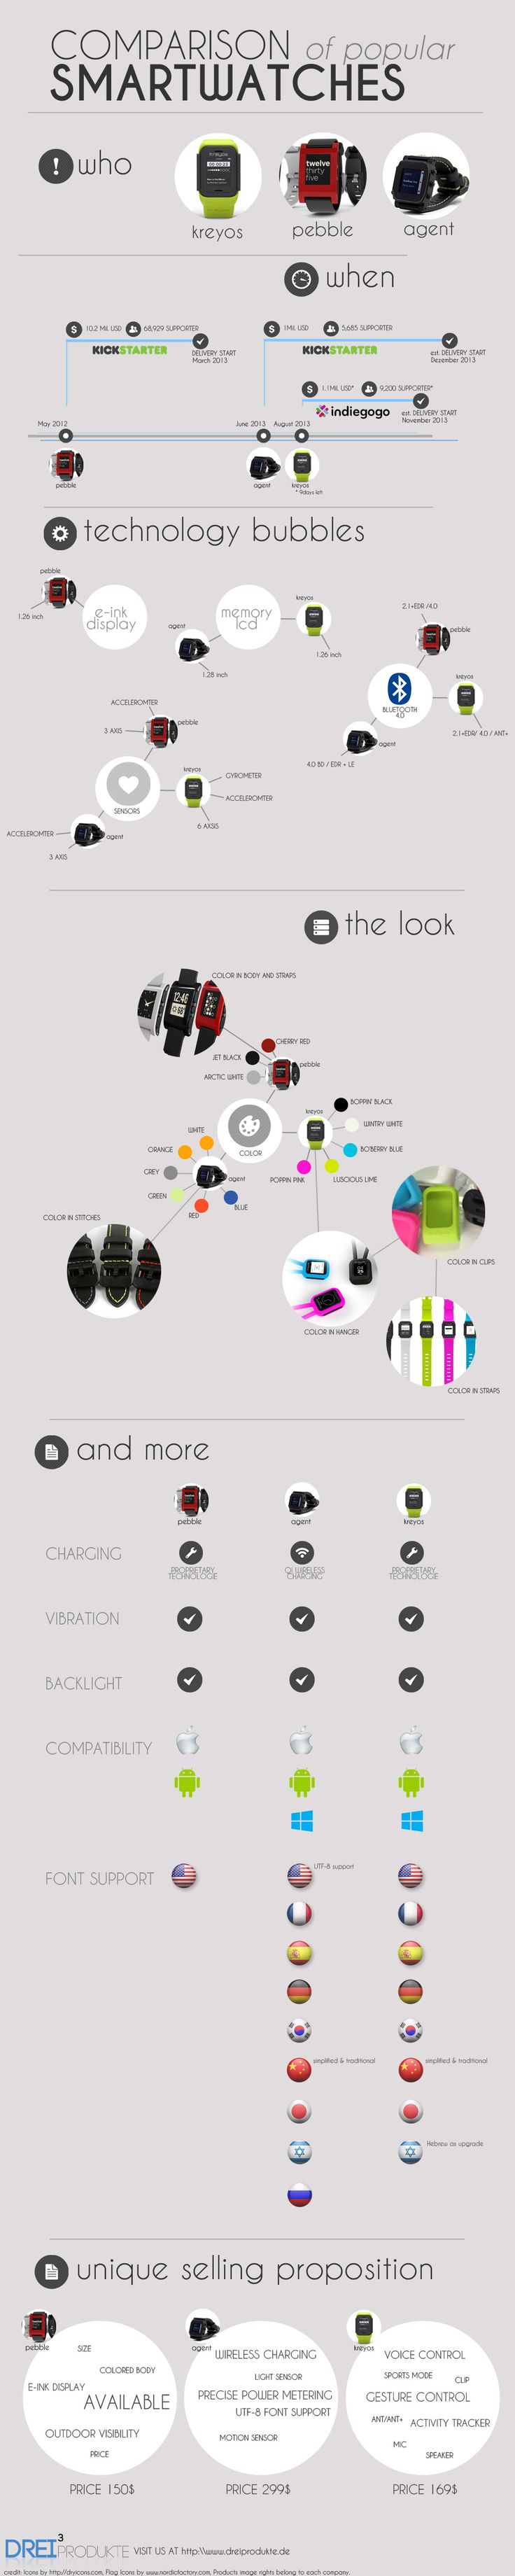 Pebble started the rush of smartwatches in 2012 at kickstarter and a lot of comp...